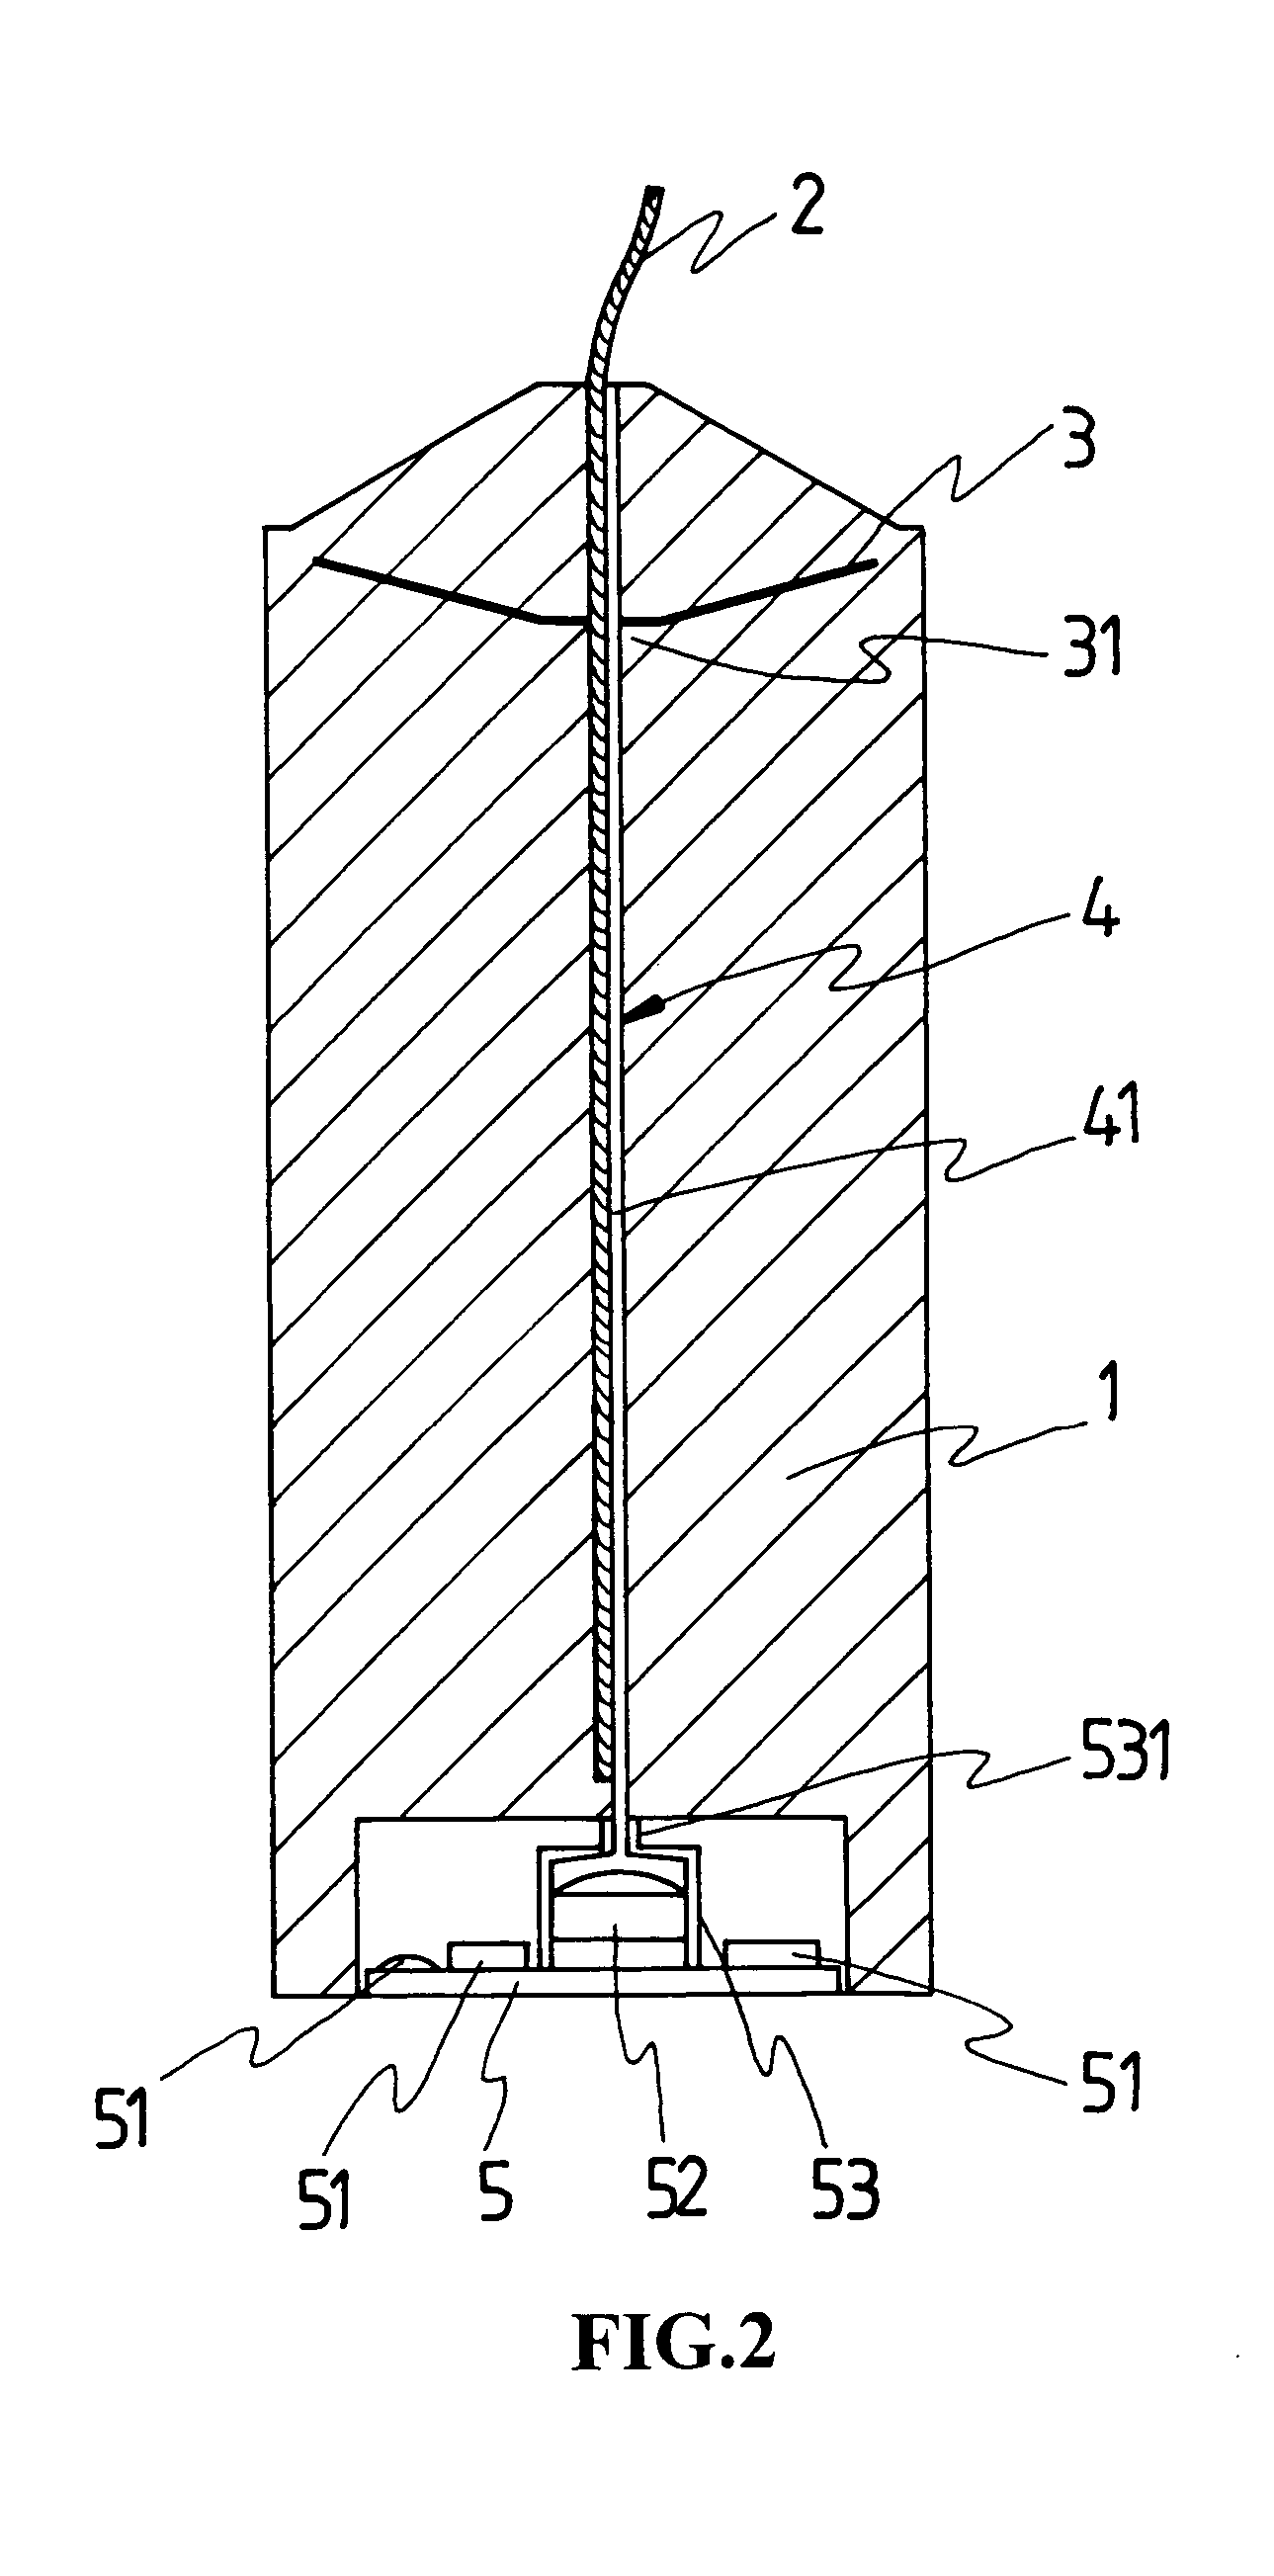 Electronic switch for drop-free candle